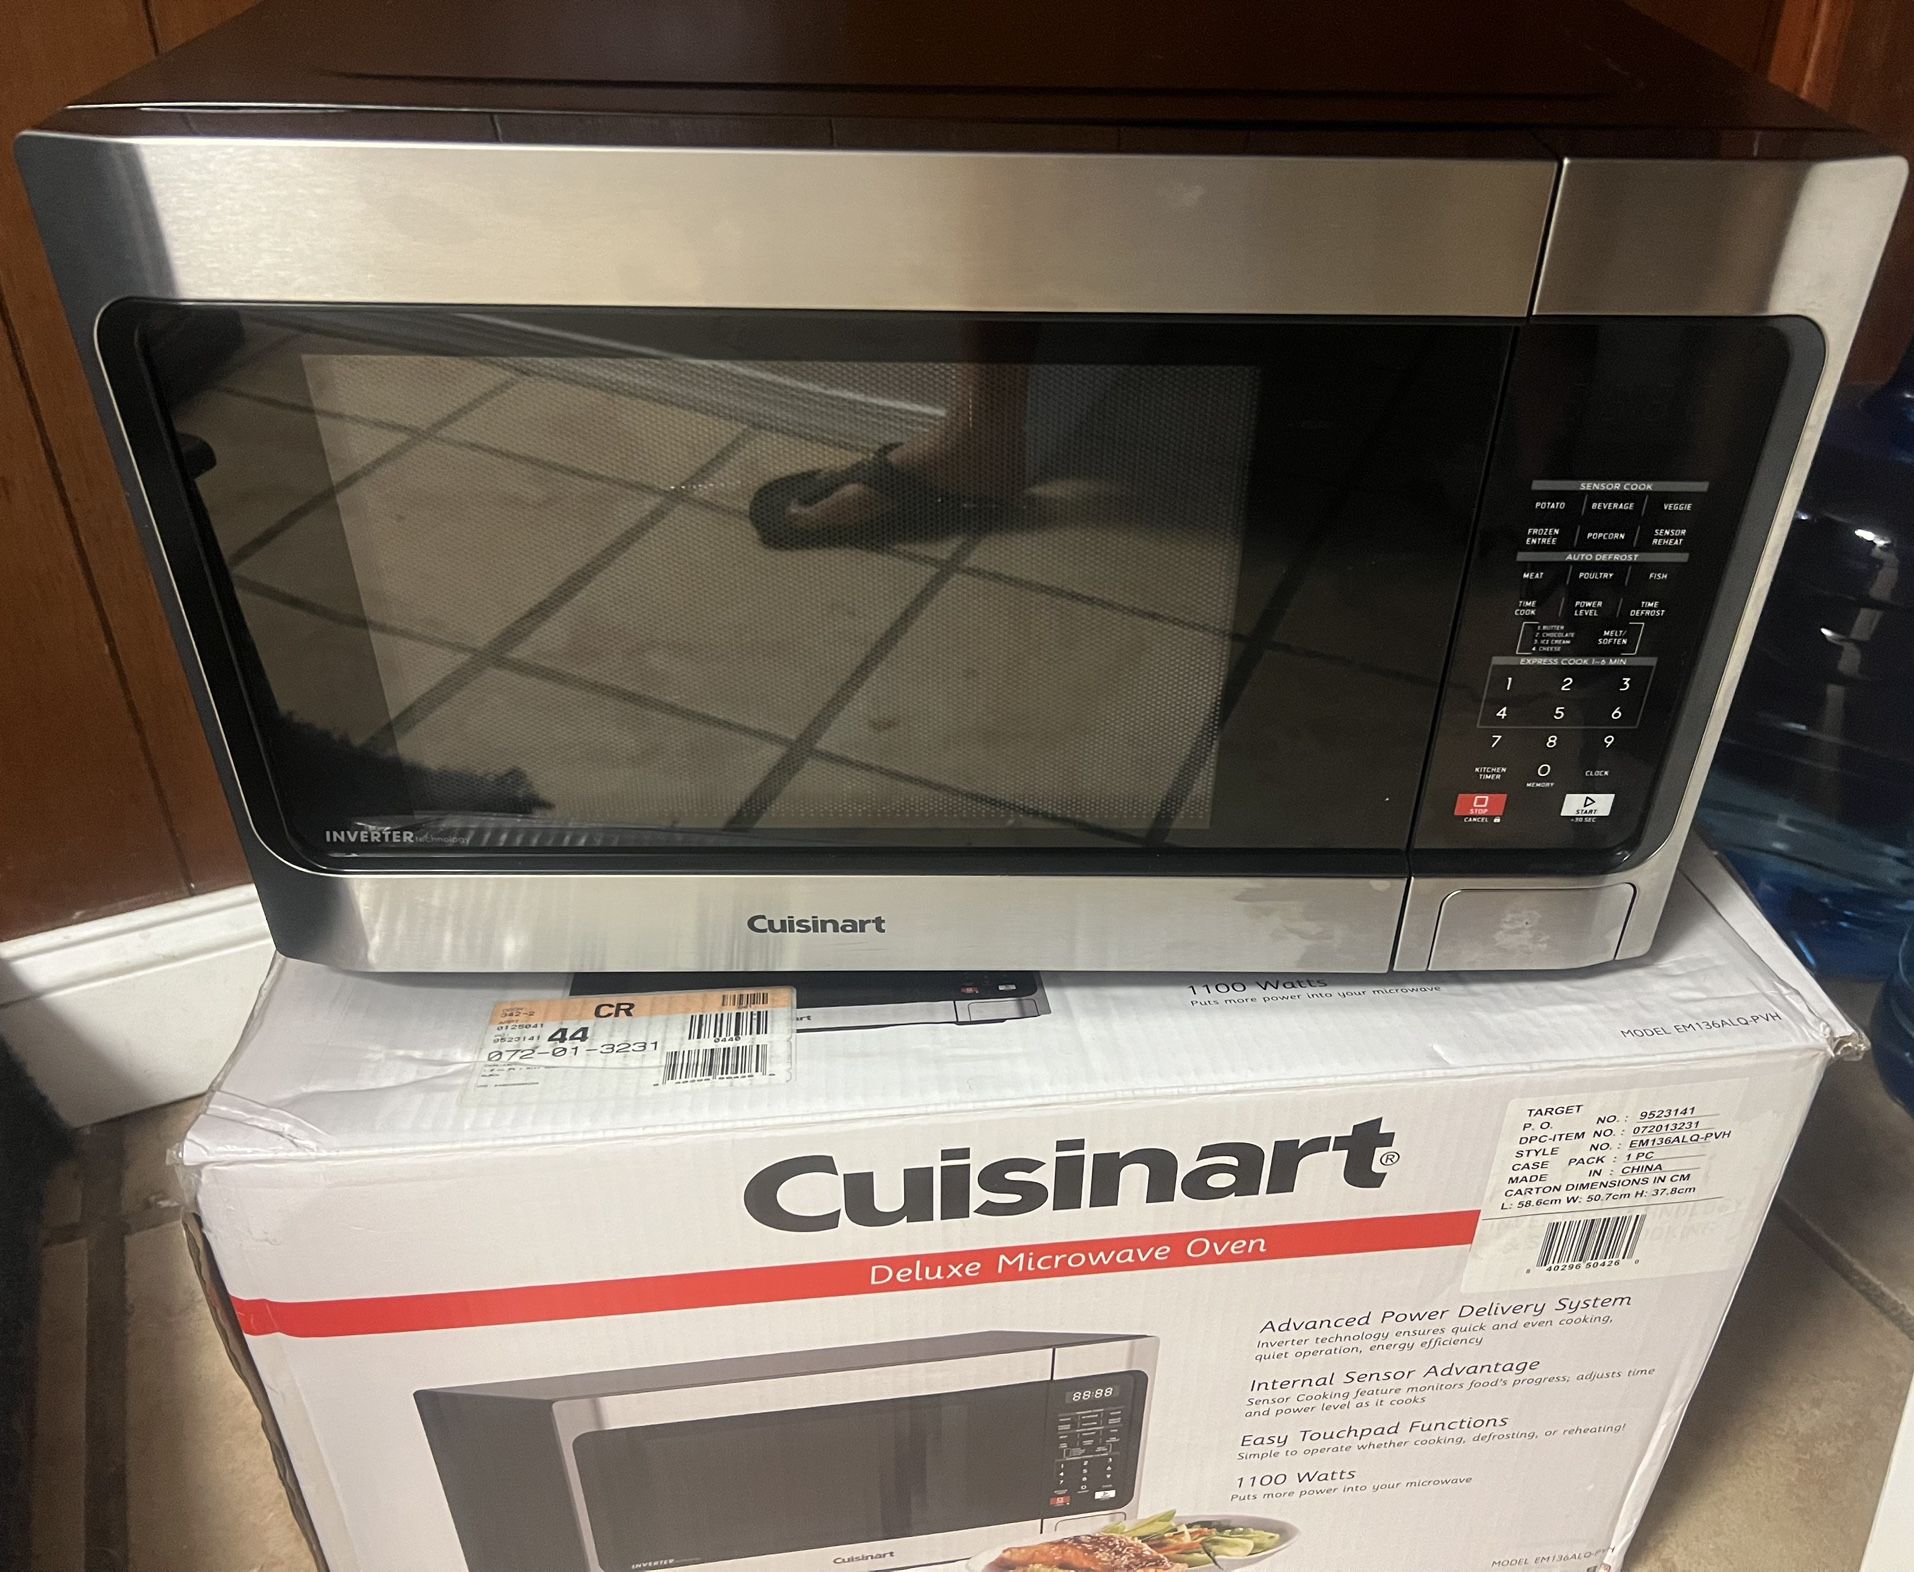 Selling Microwave Oven 1.3 Cu Ft Cuisinart 